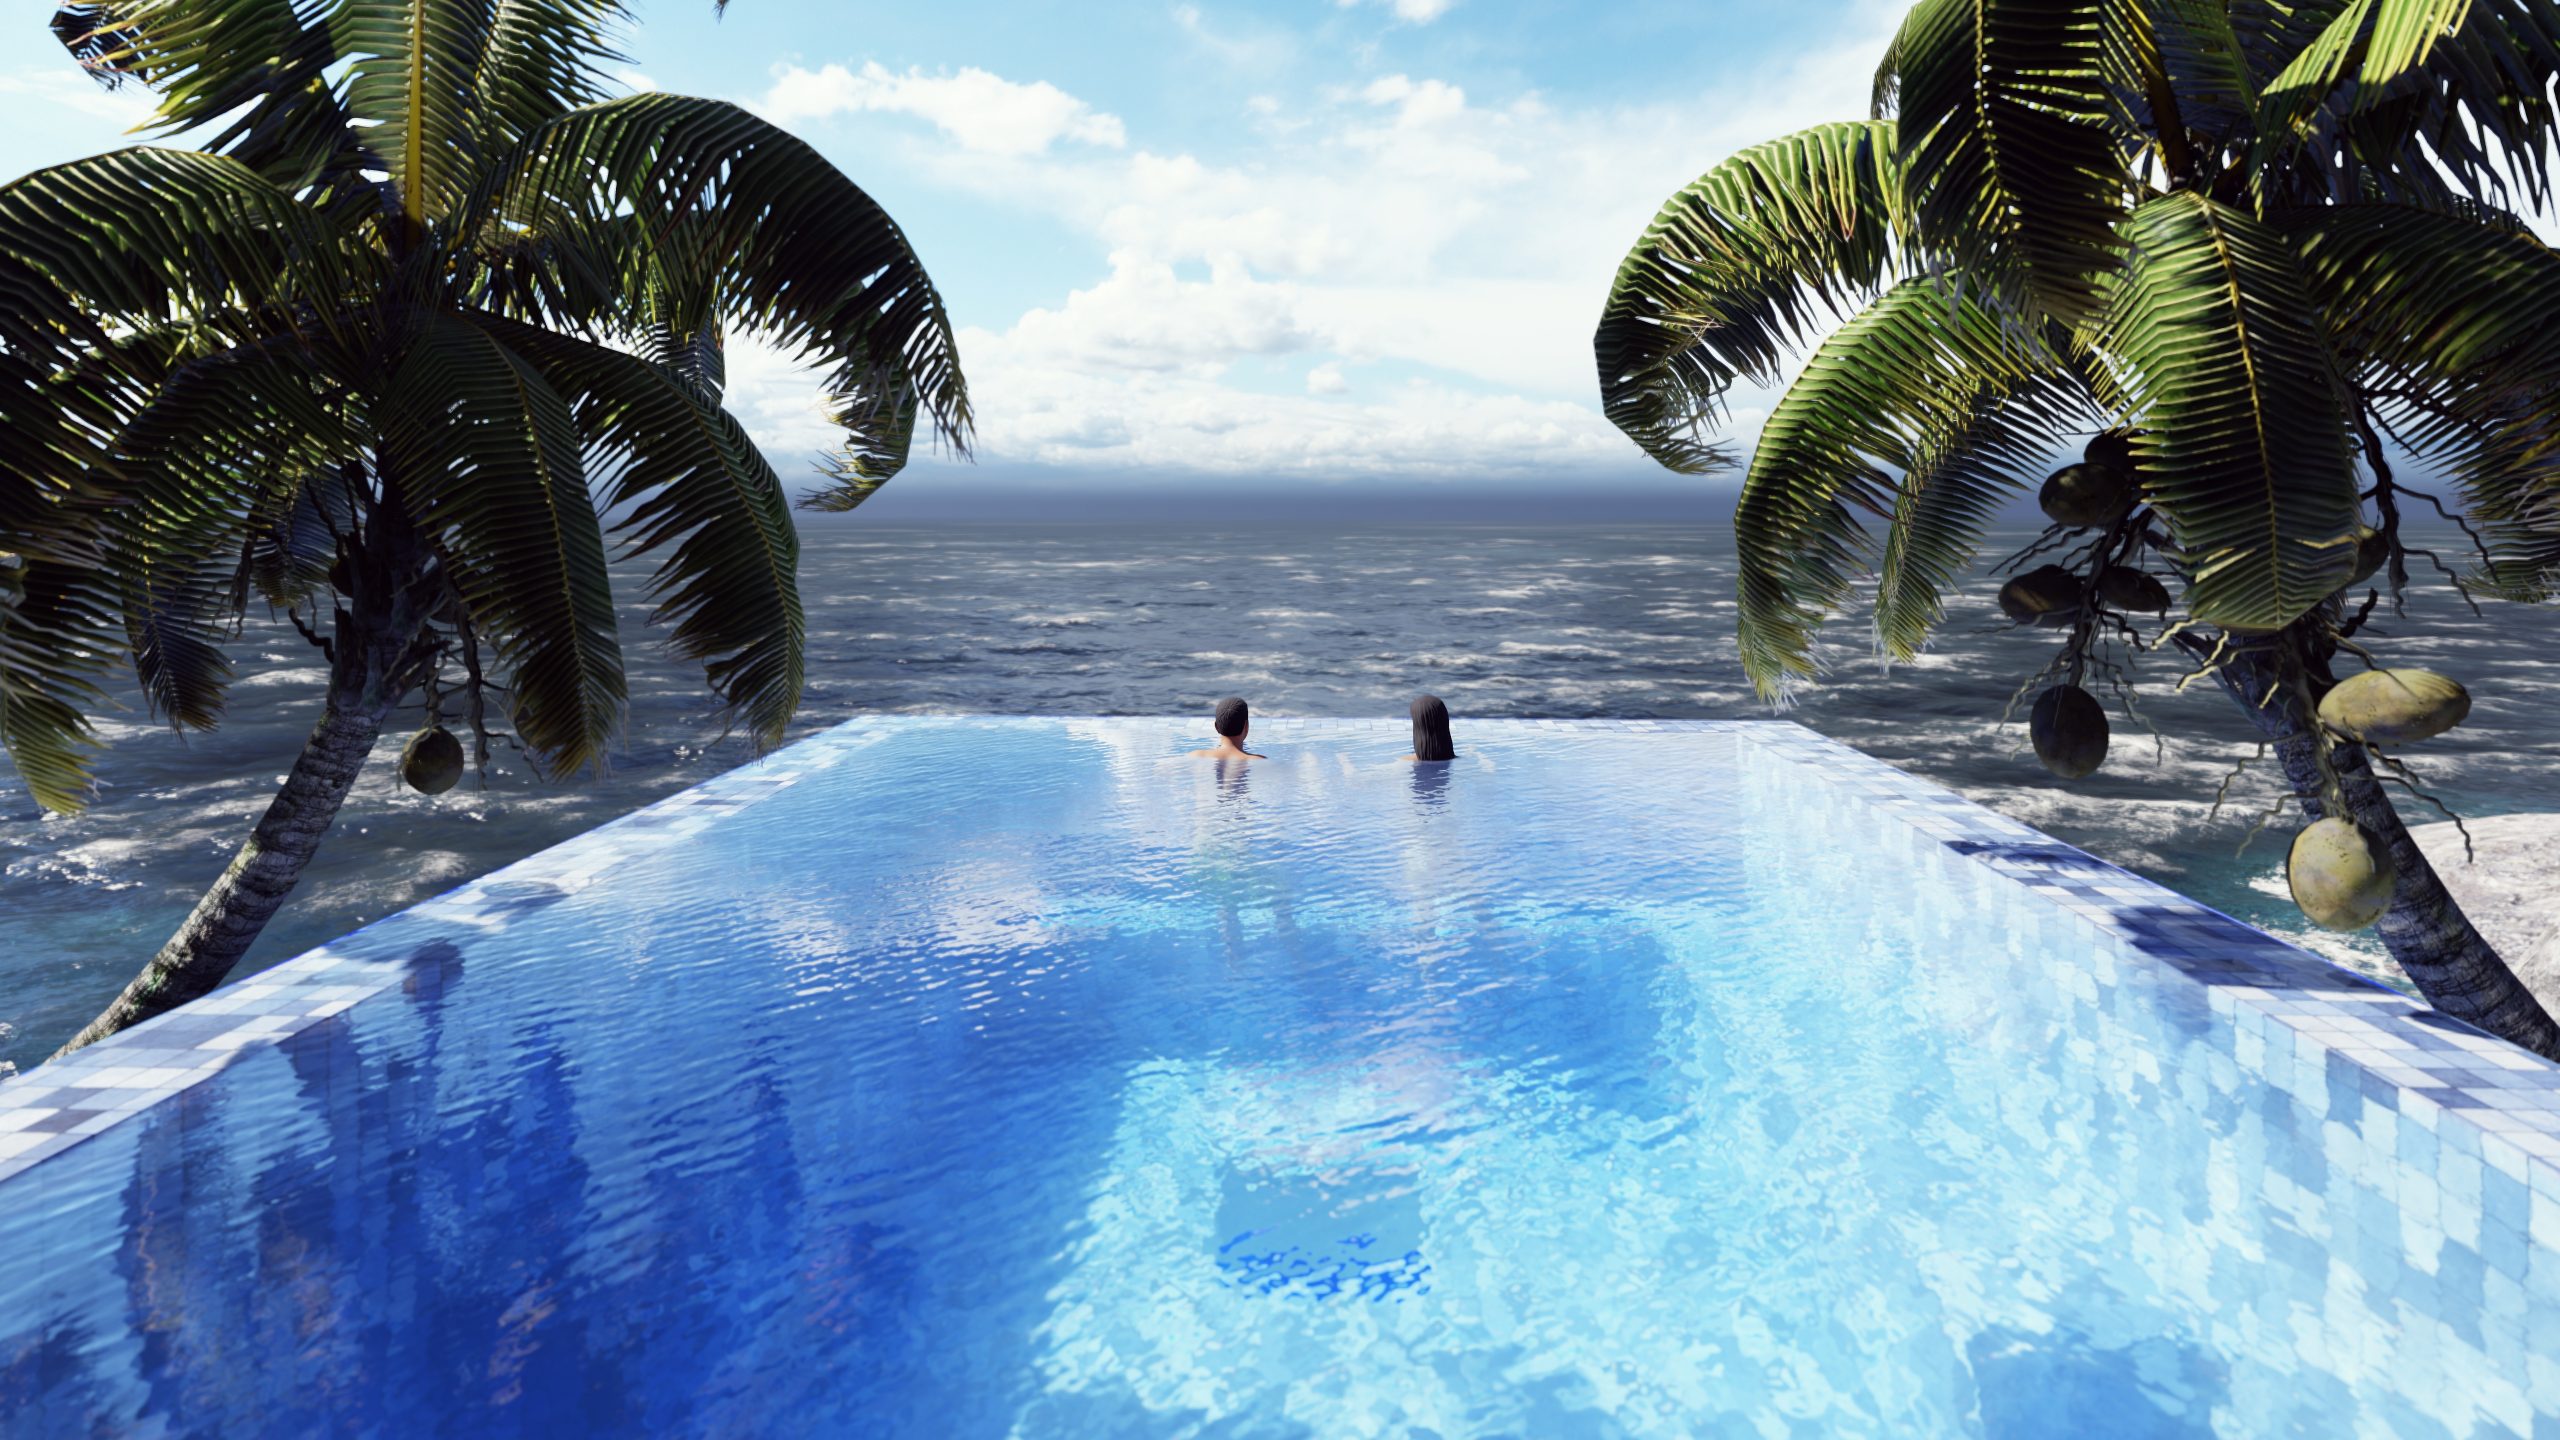 Beautiful swimming pool with bathing man and woman at sunny day, on a lost tropical island.